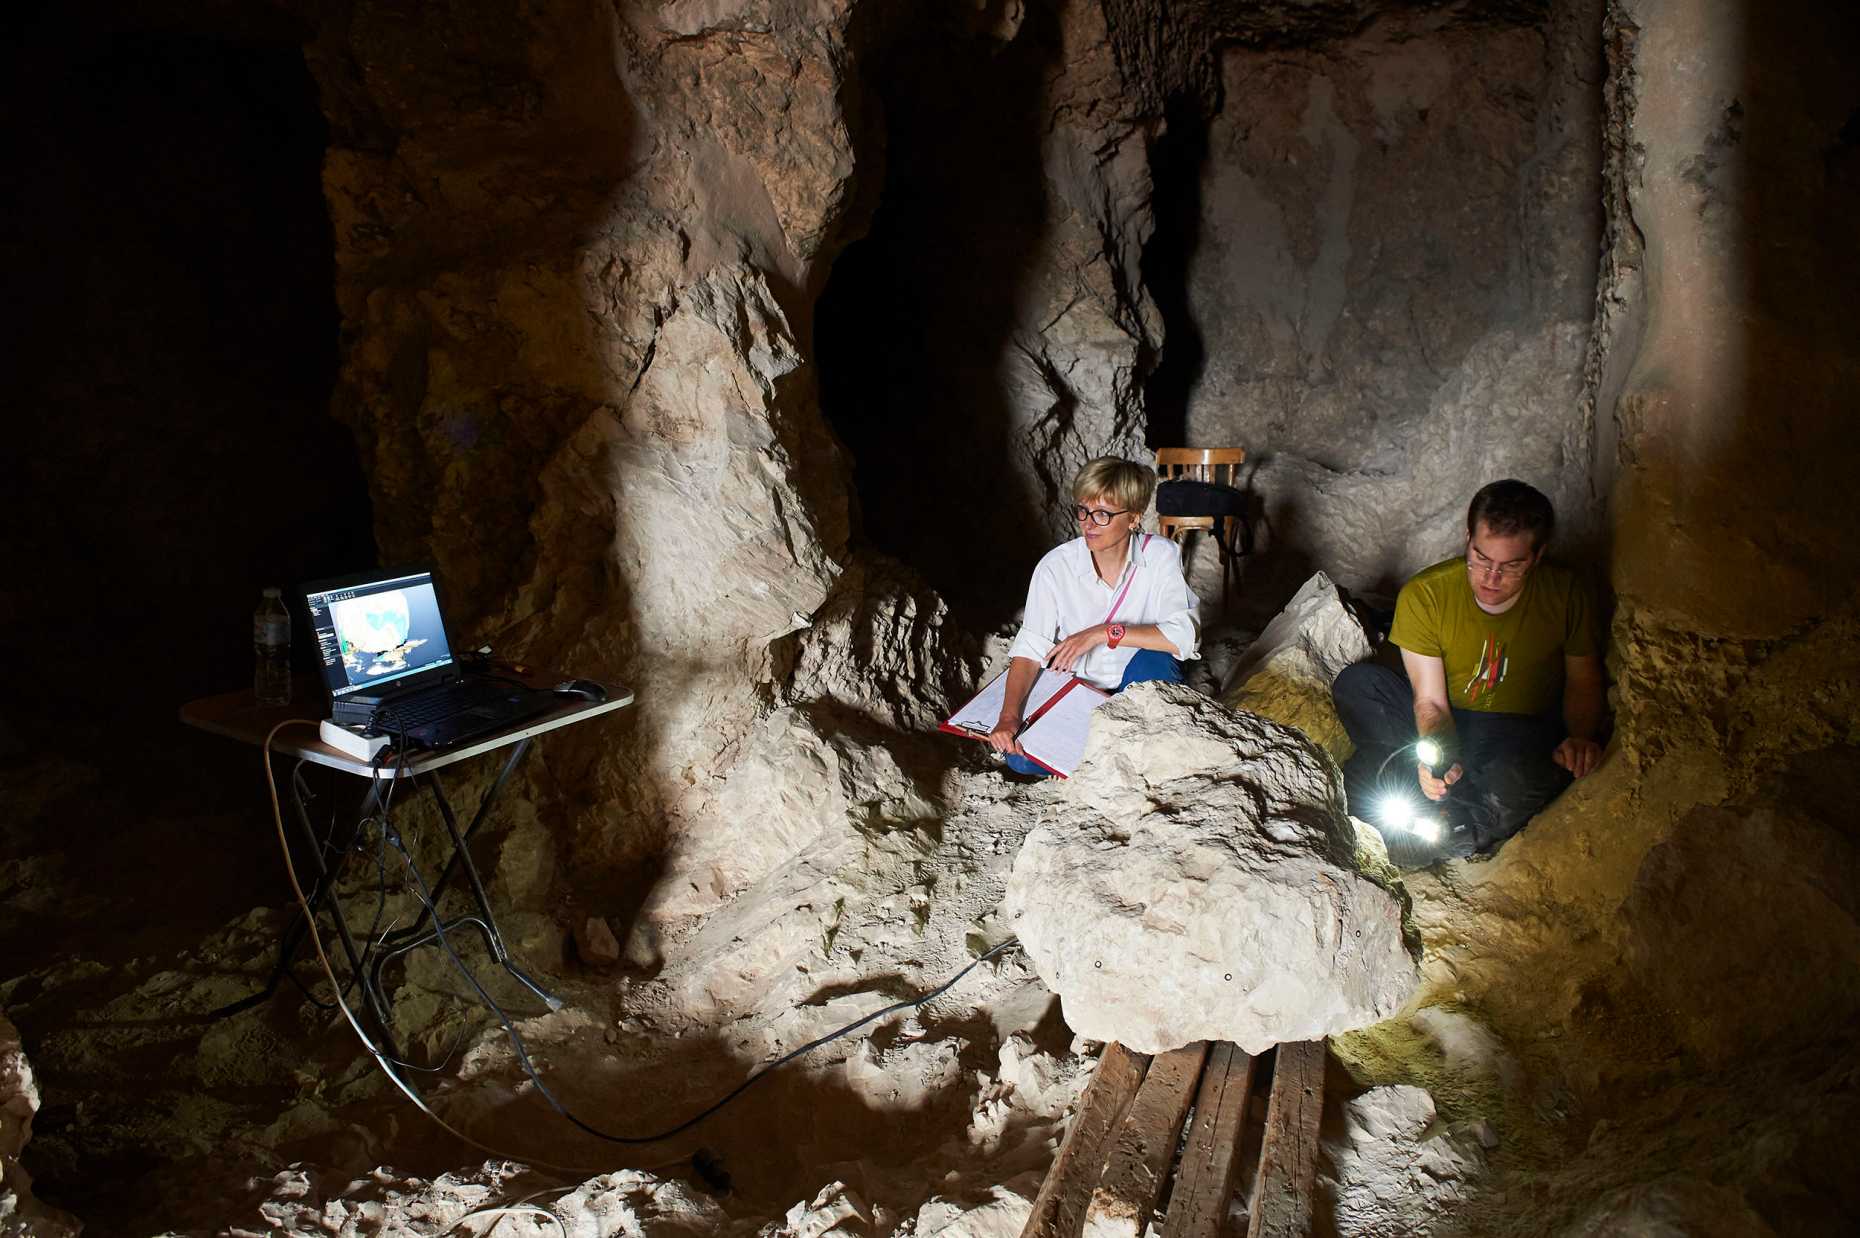 Image of two persions performing measurements in a cave